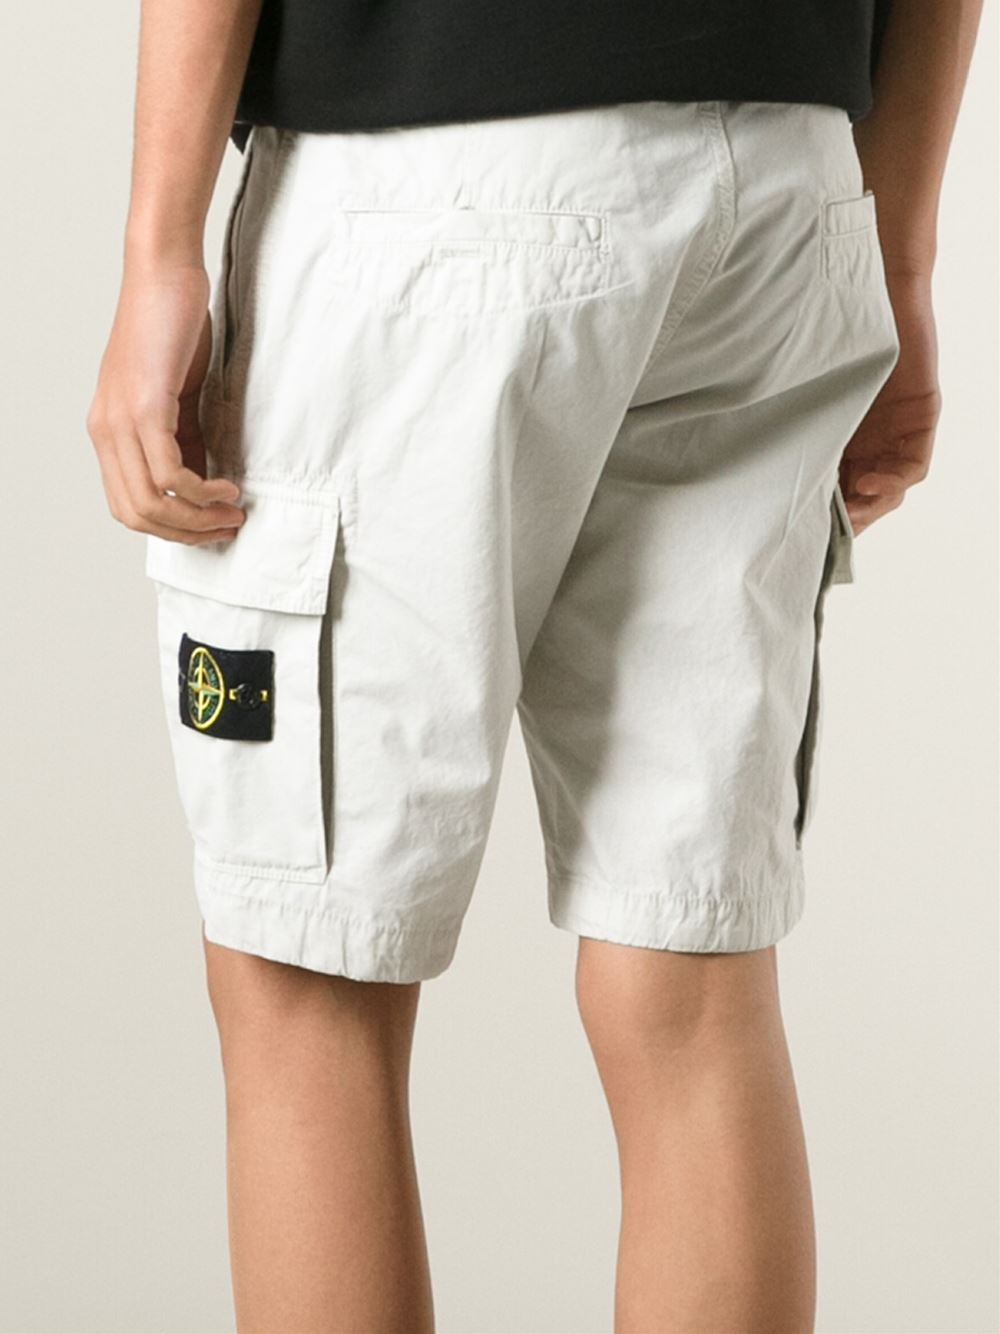 Stone Island Cargo Shorts in White for Men - Lyst